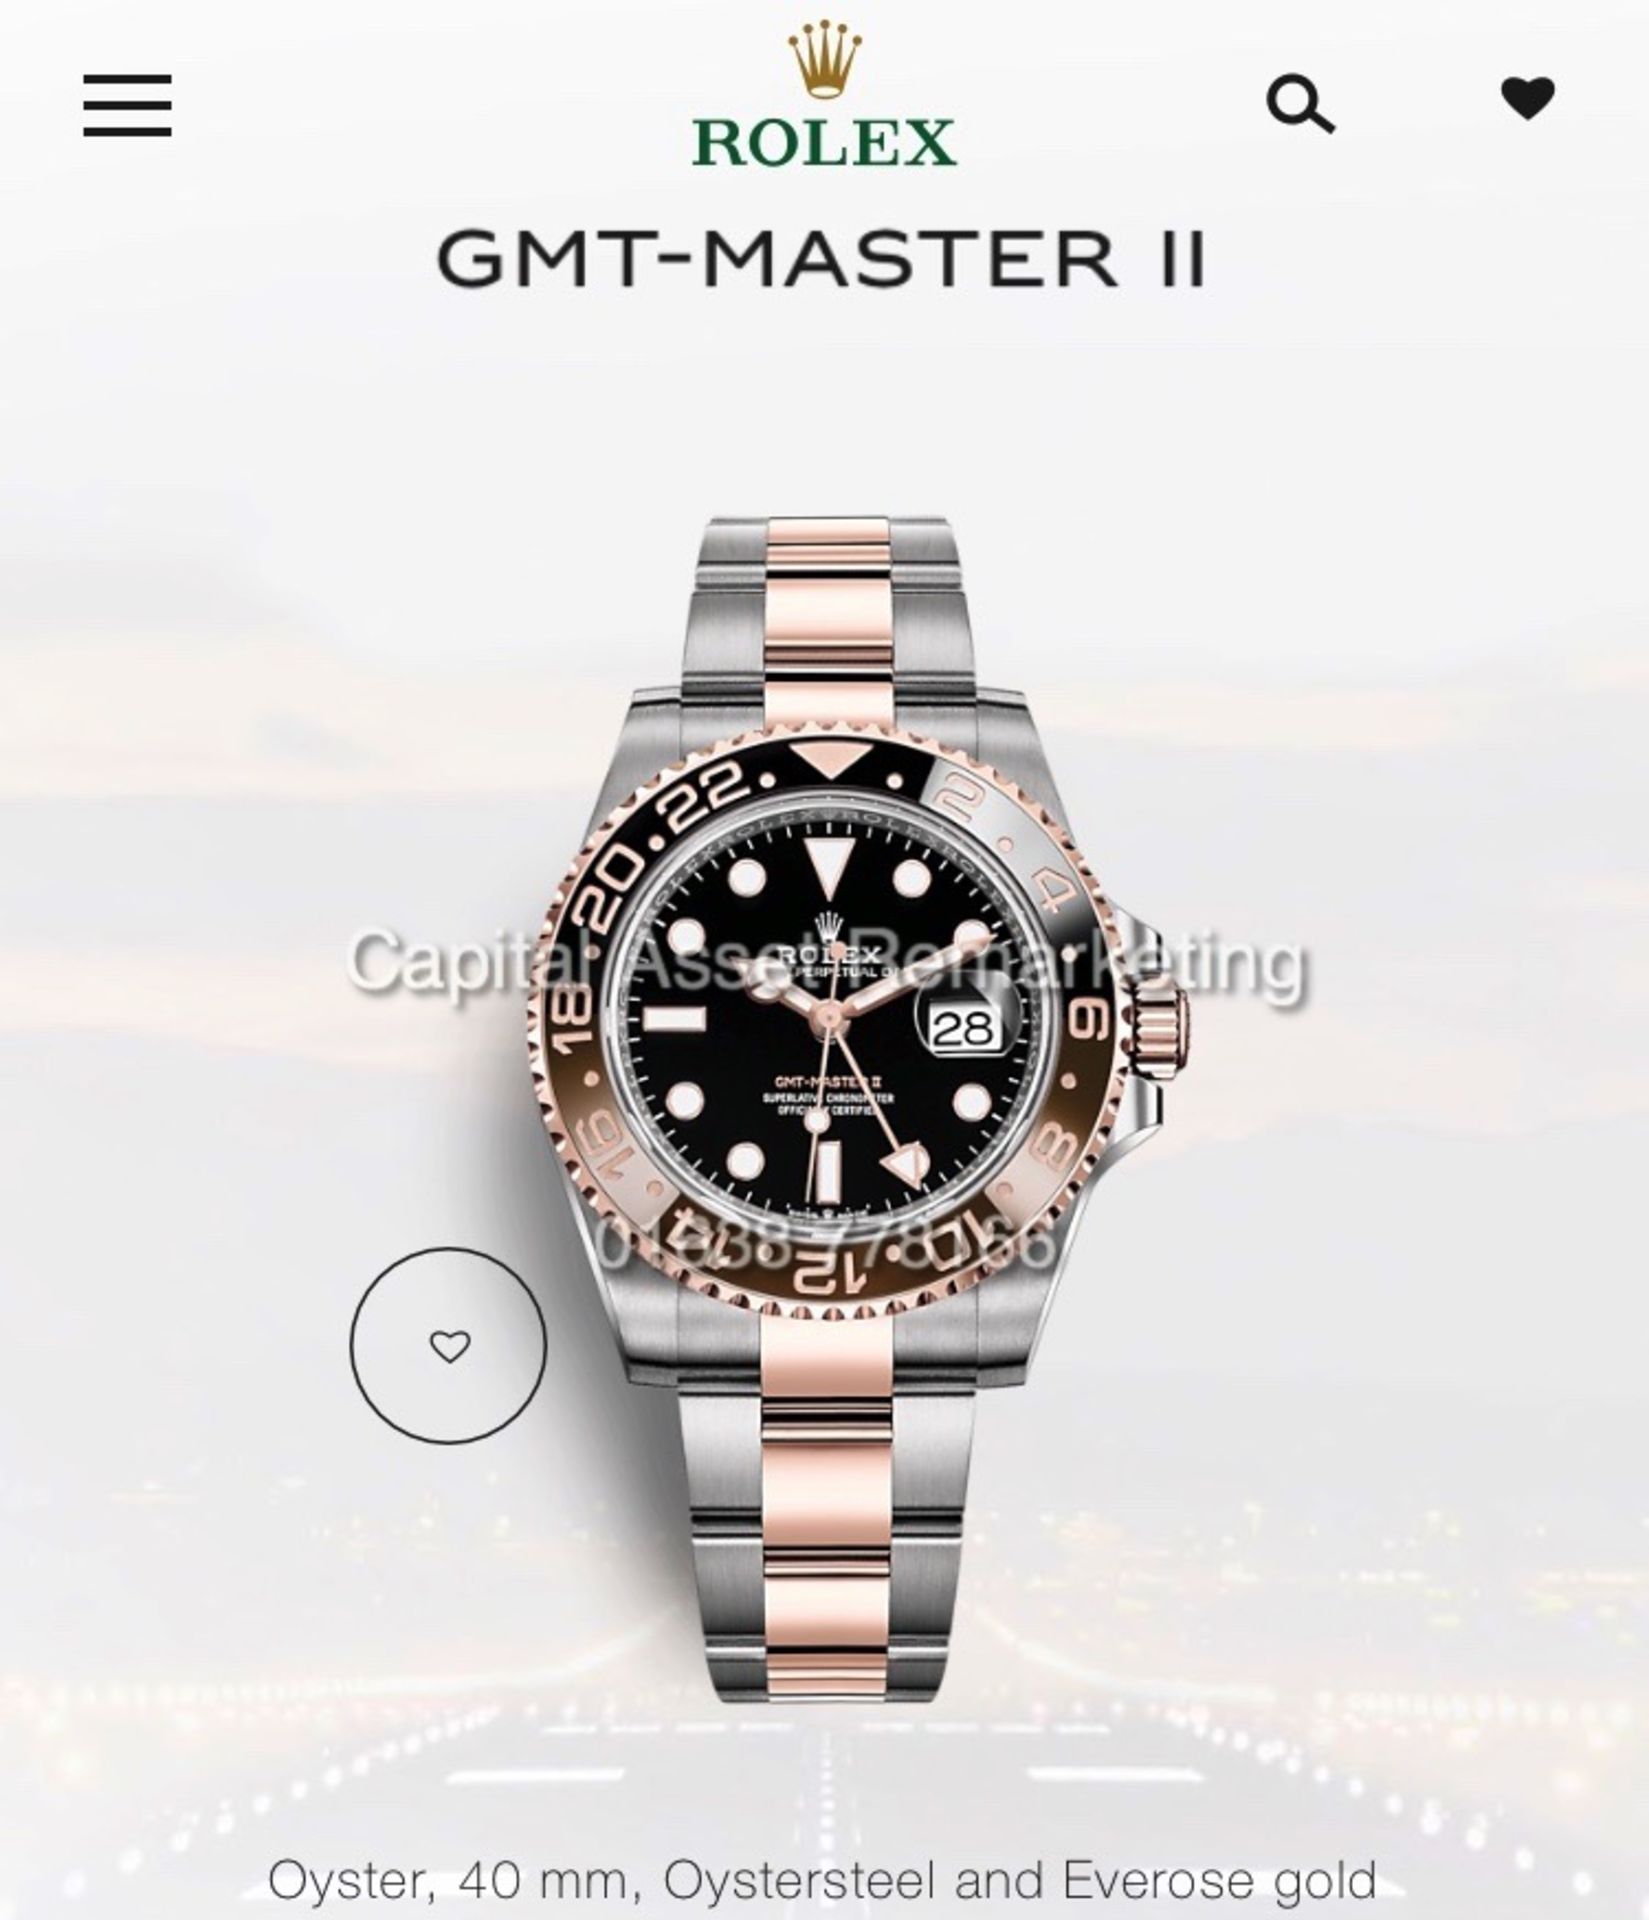 ROLEX GMT-MASTER11 "ROOTBEER" STEEL&18ct EVEROSE GOLD (NOVEMBER 2018-NEVER WORN) READY FOR CHRISTMAS